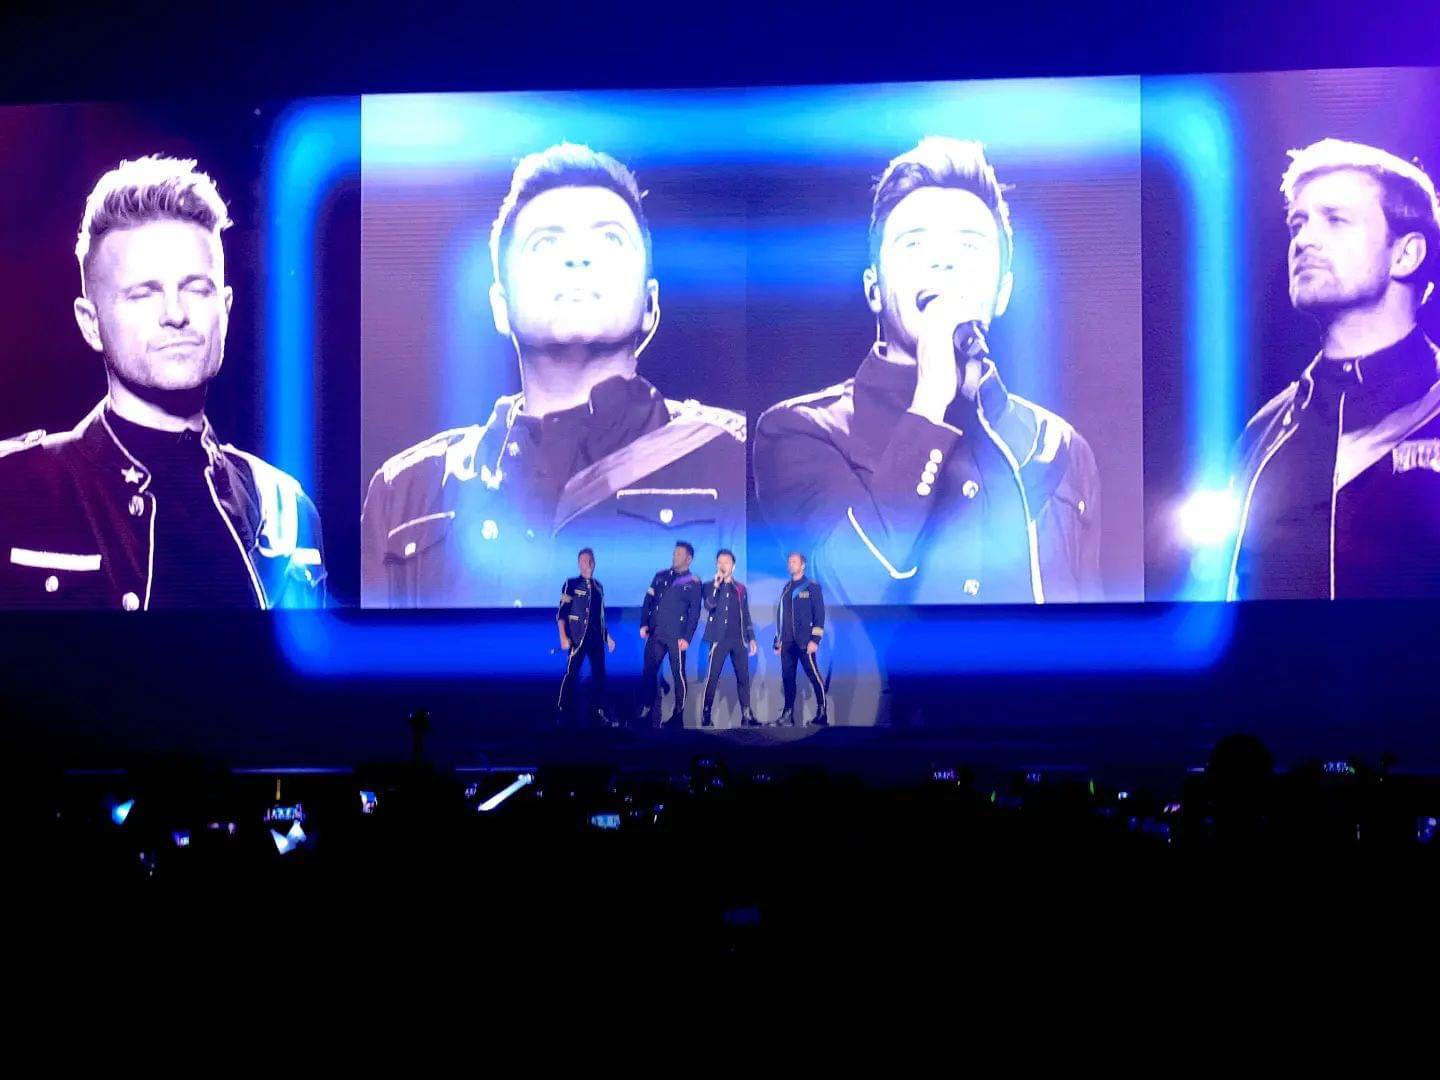 westlife-returns-to-manila-for-wild-dreams-tour-in-february